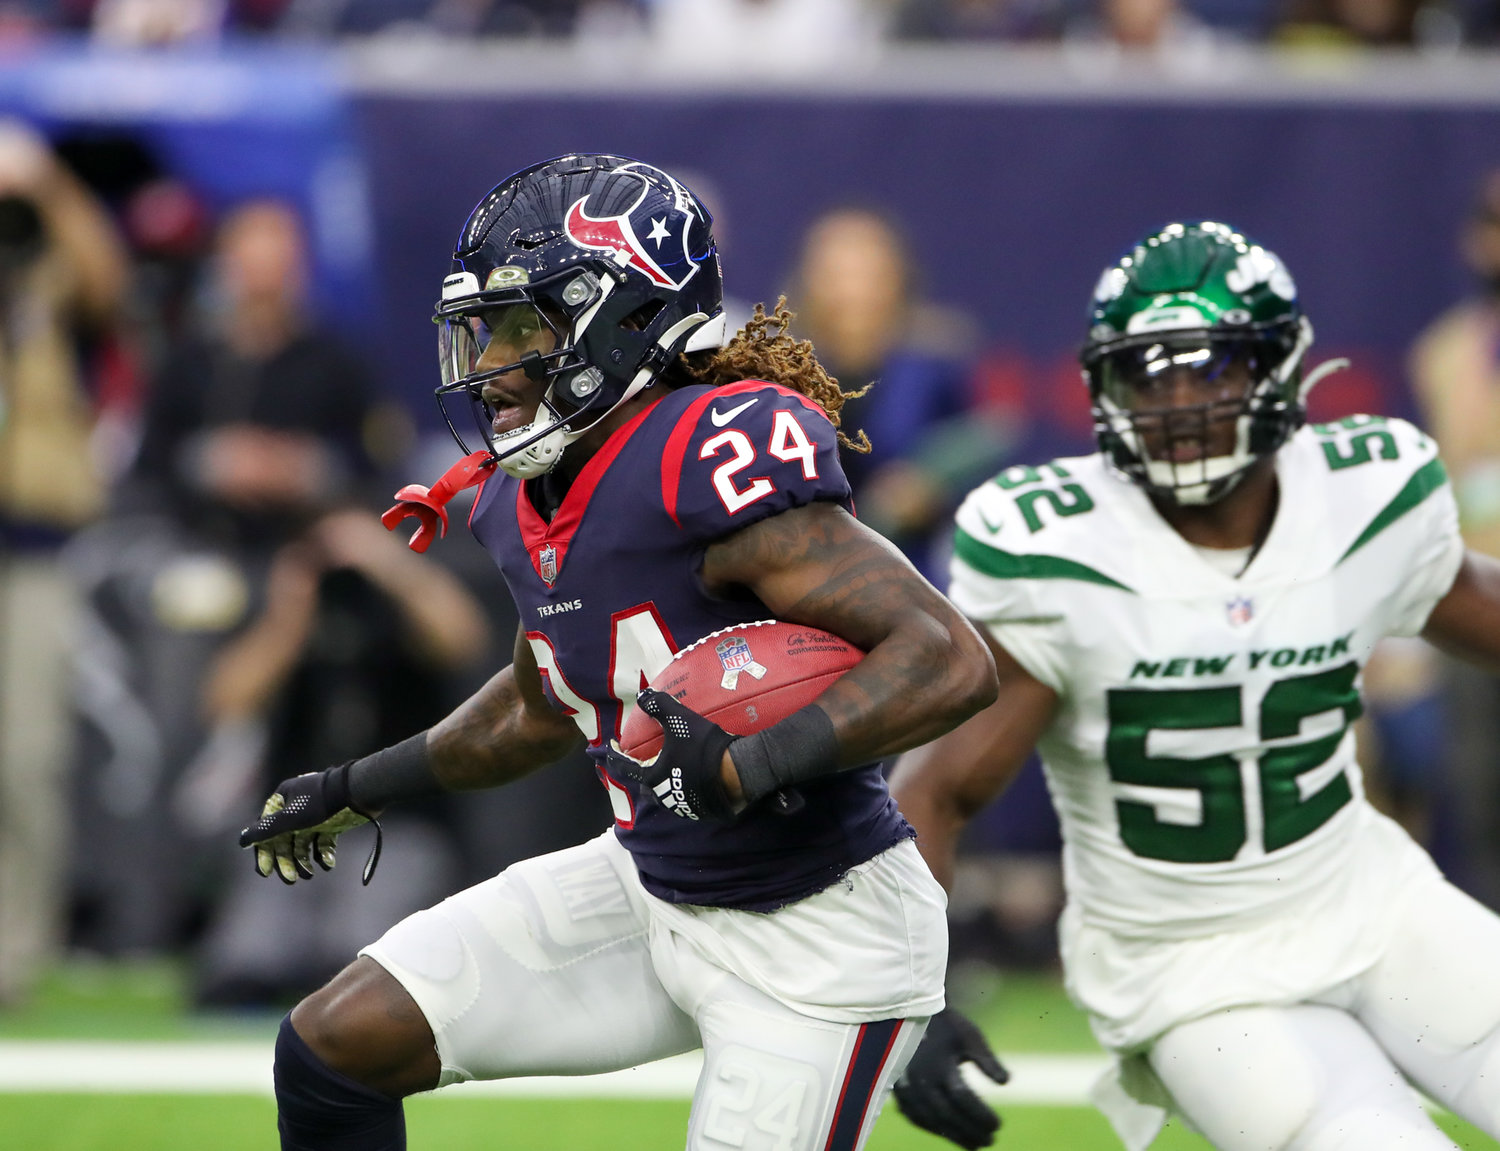 Houston Texans cornerback Tremon Smith (24) carries the ball on a kickoff return during an NFL game between the Houston Texans and the New York Jets on November 28, 2021 in Houston, Texas. The Jets won, 21-14